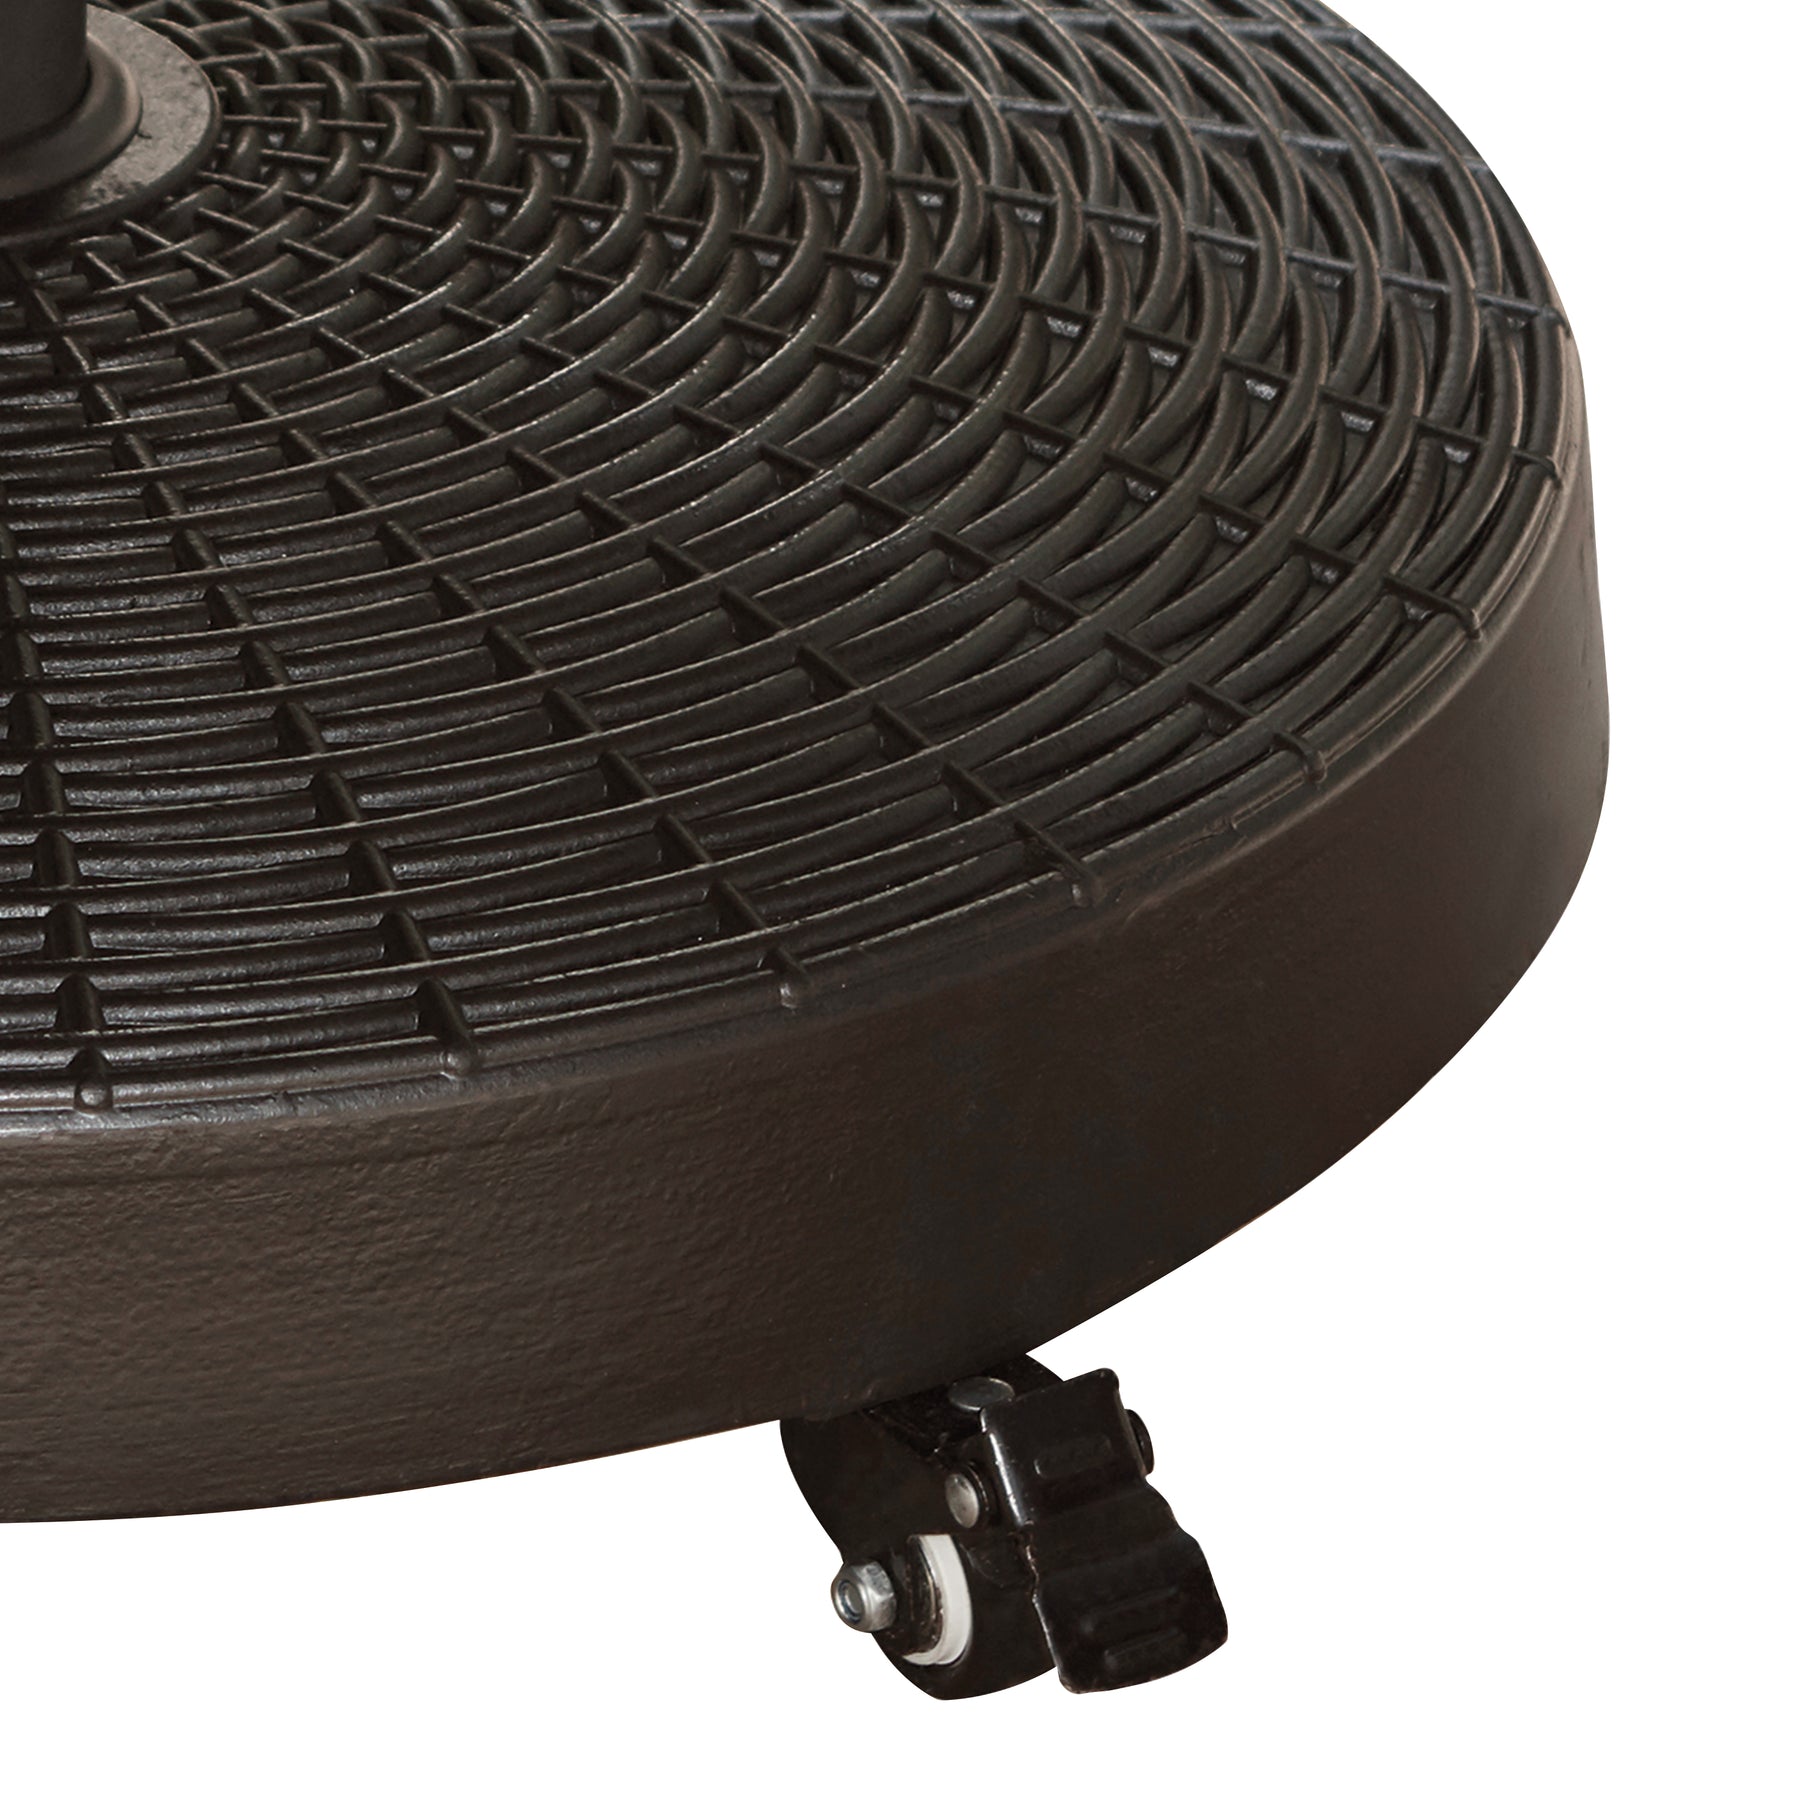 Close-up of a wheel on the Bliss Outdoors 20.5-inch Outdoor Umbrella Stand.